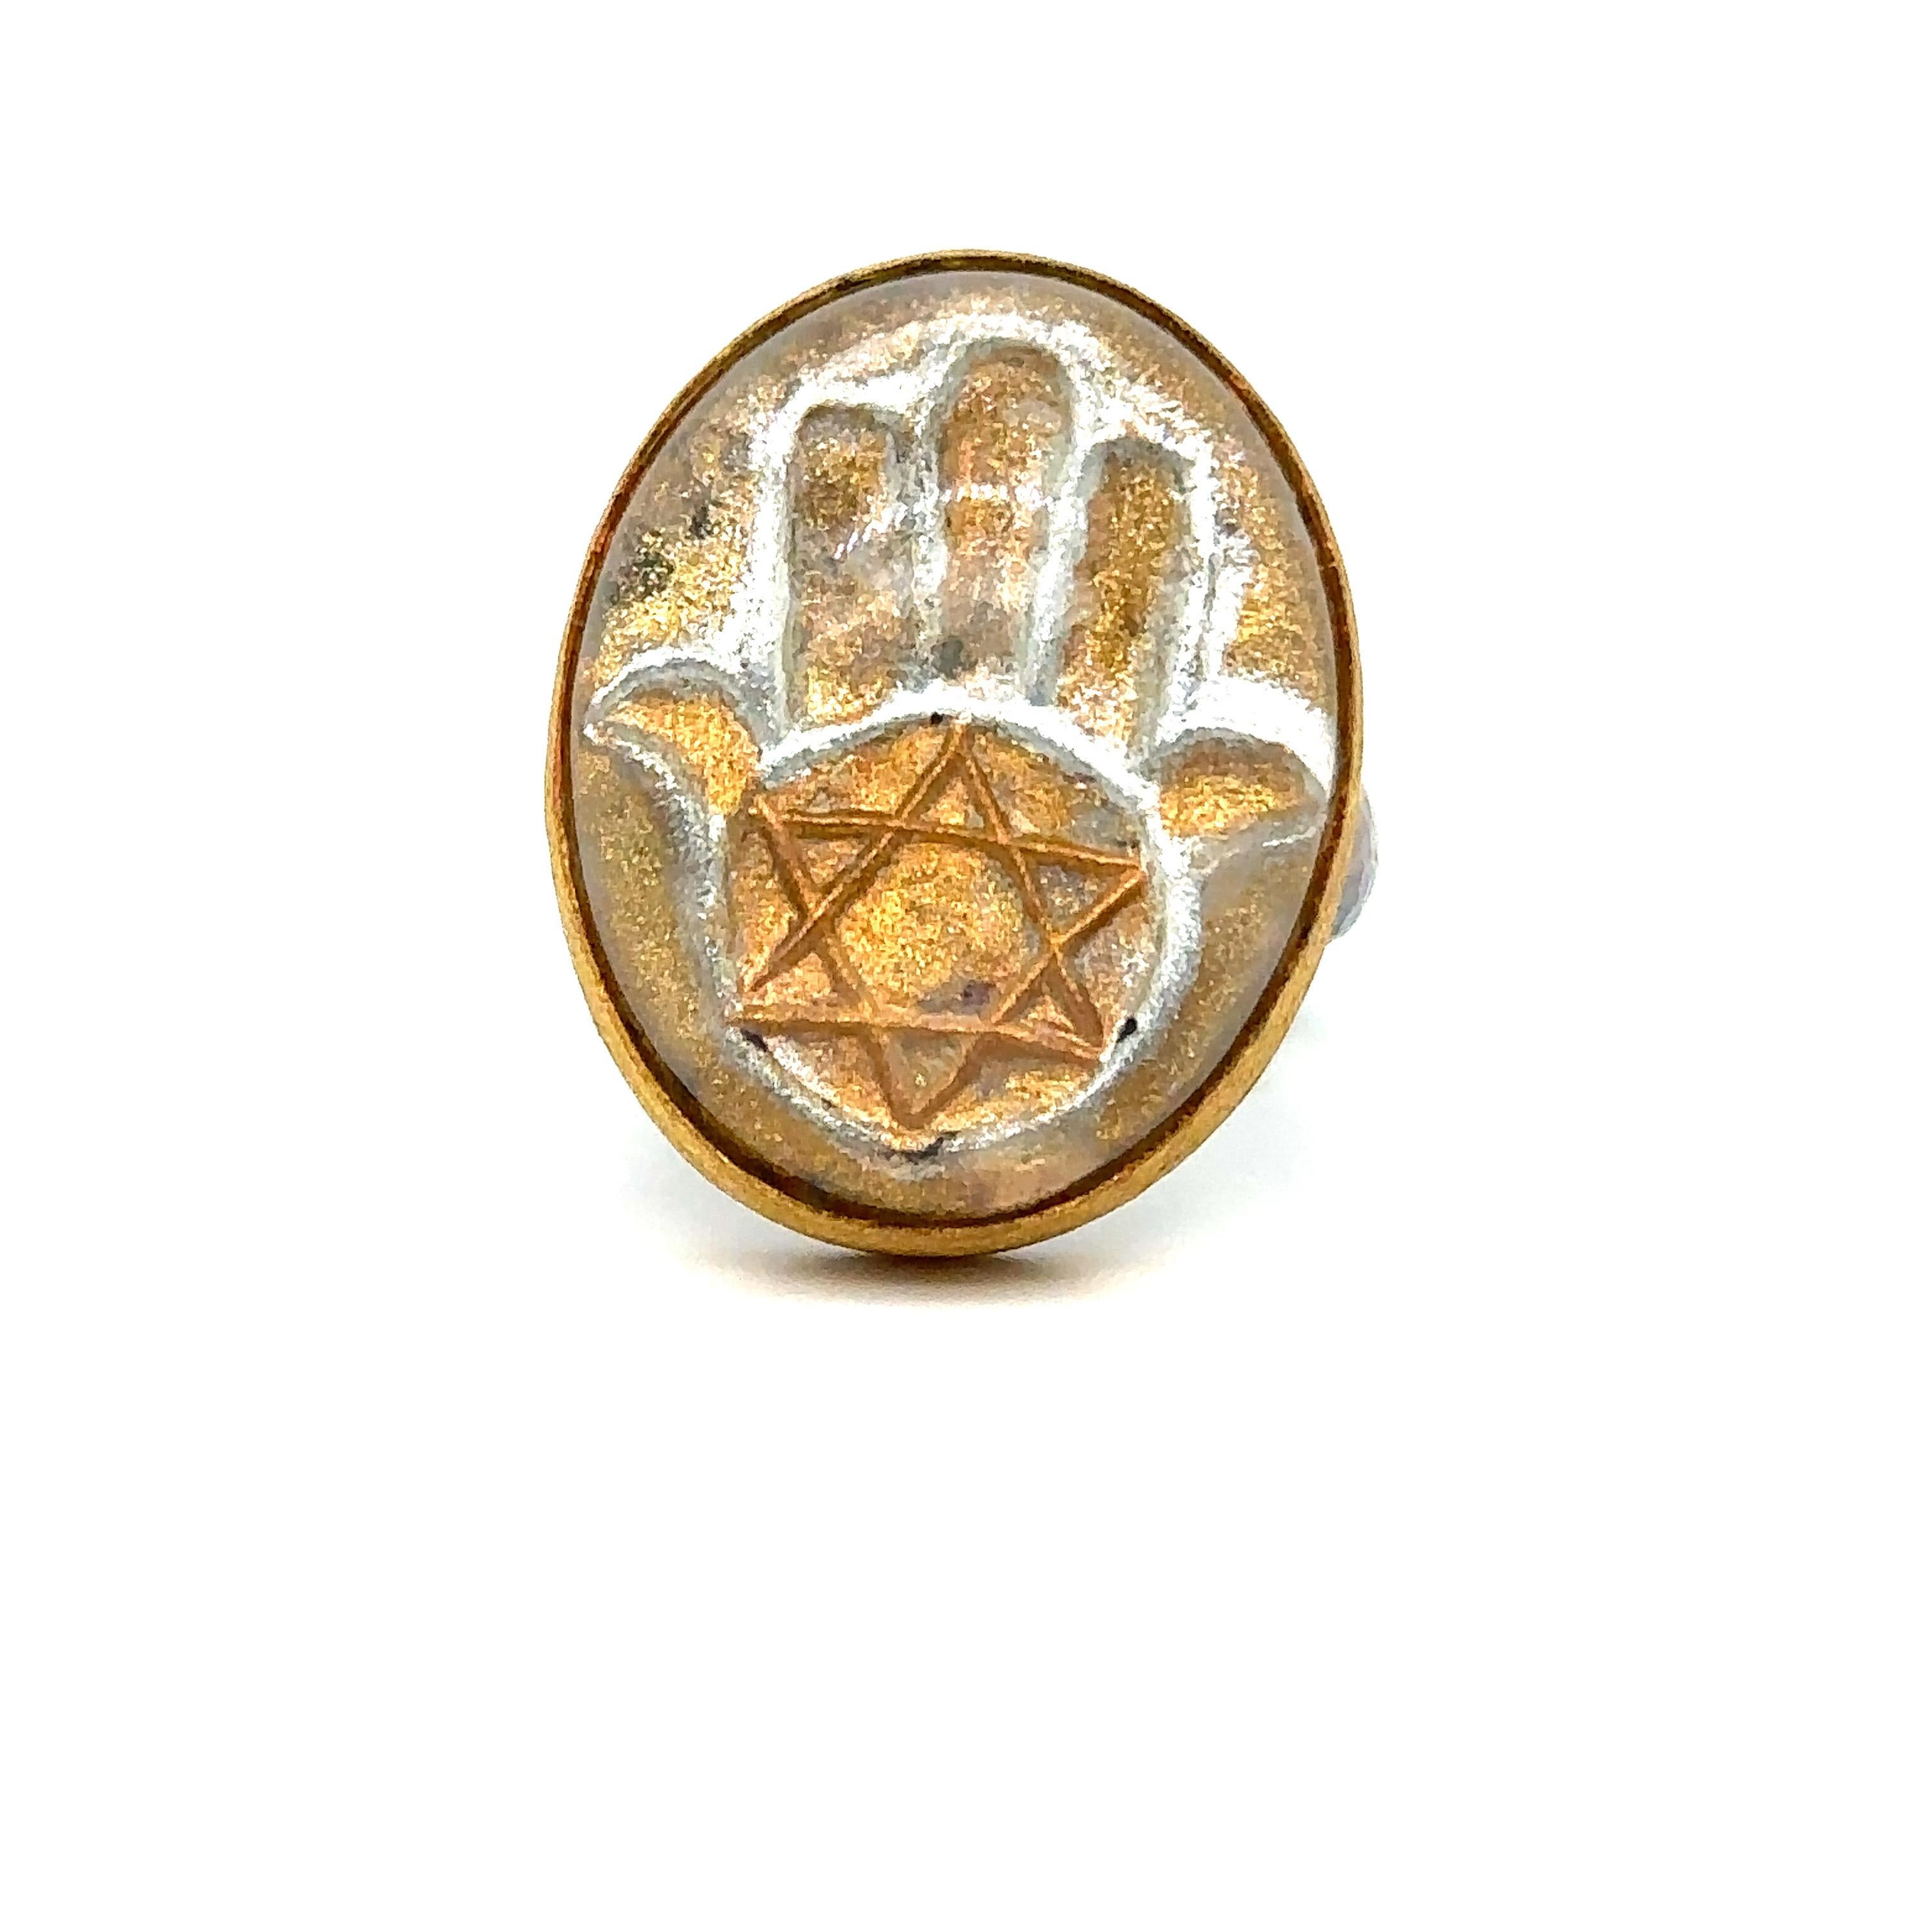 JAS-19-1818 - 24K GOLD/STERLING SILVER HAMSA RING with 30.00CT CARVED QUARTZ  For Sale 1